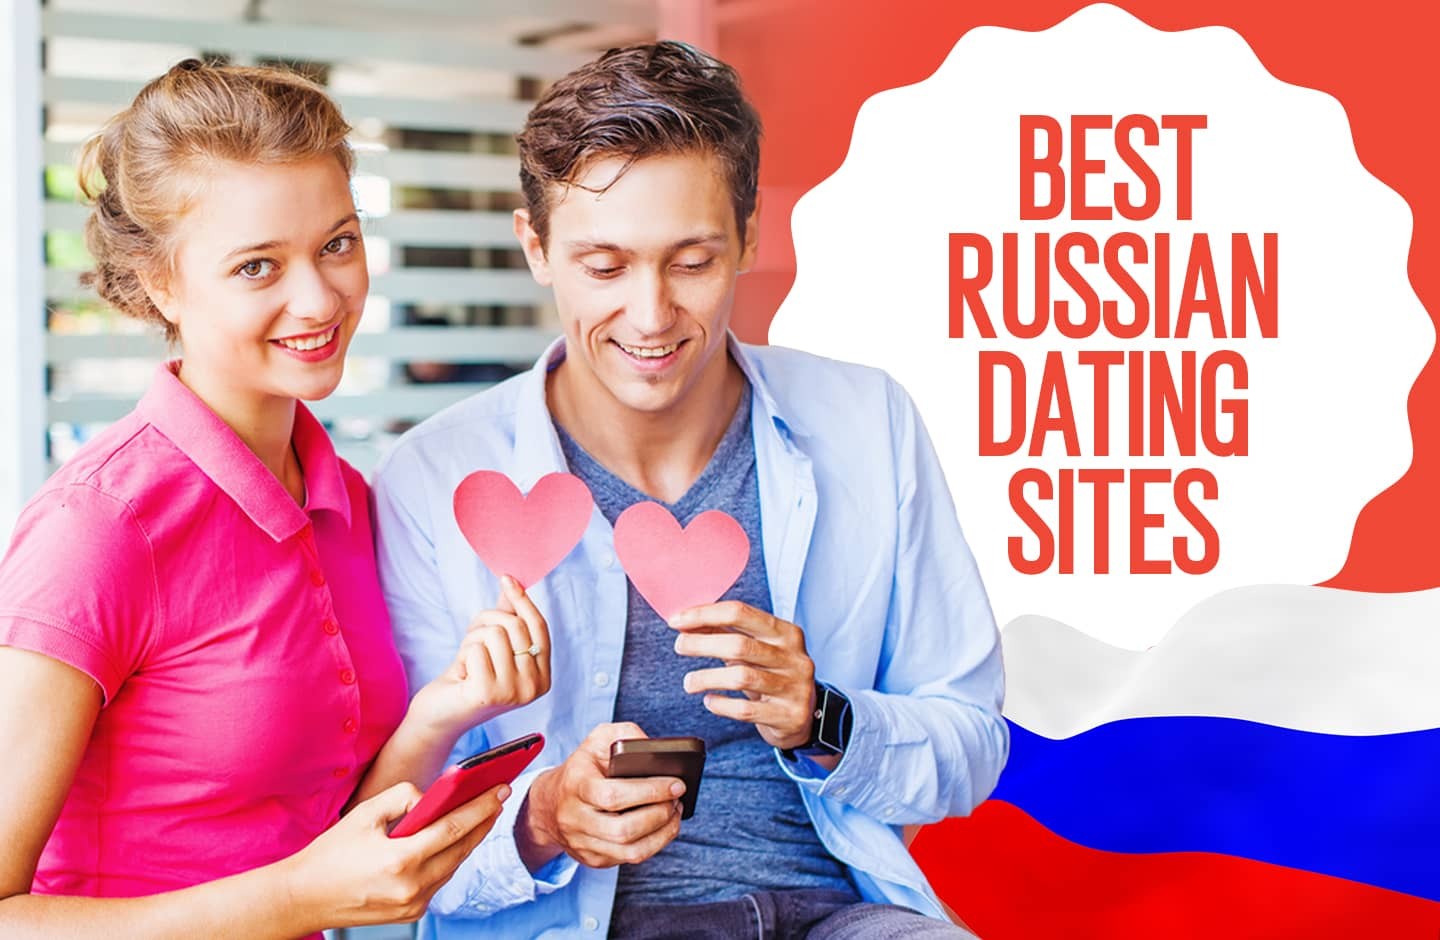 Local dating site in Moscow